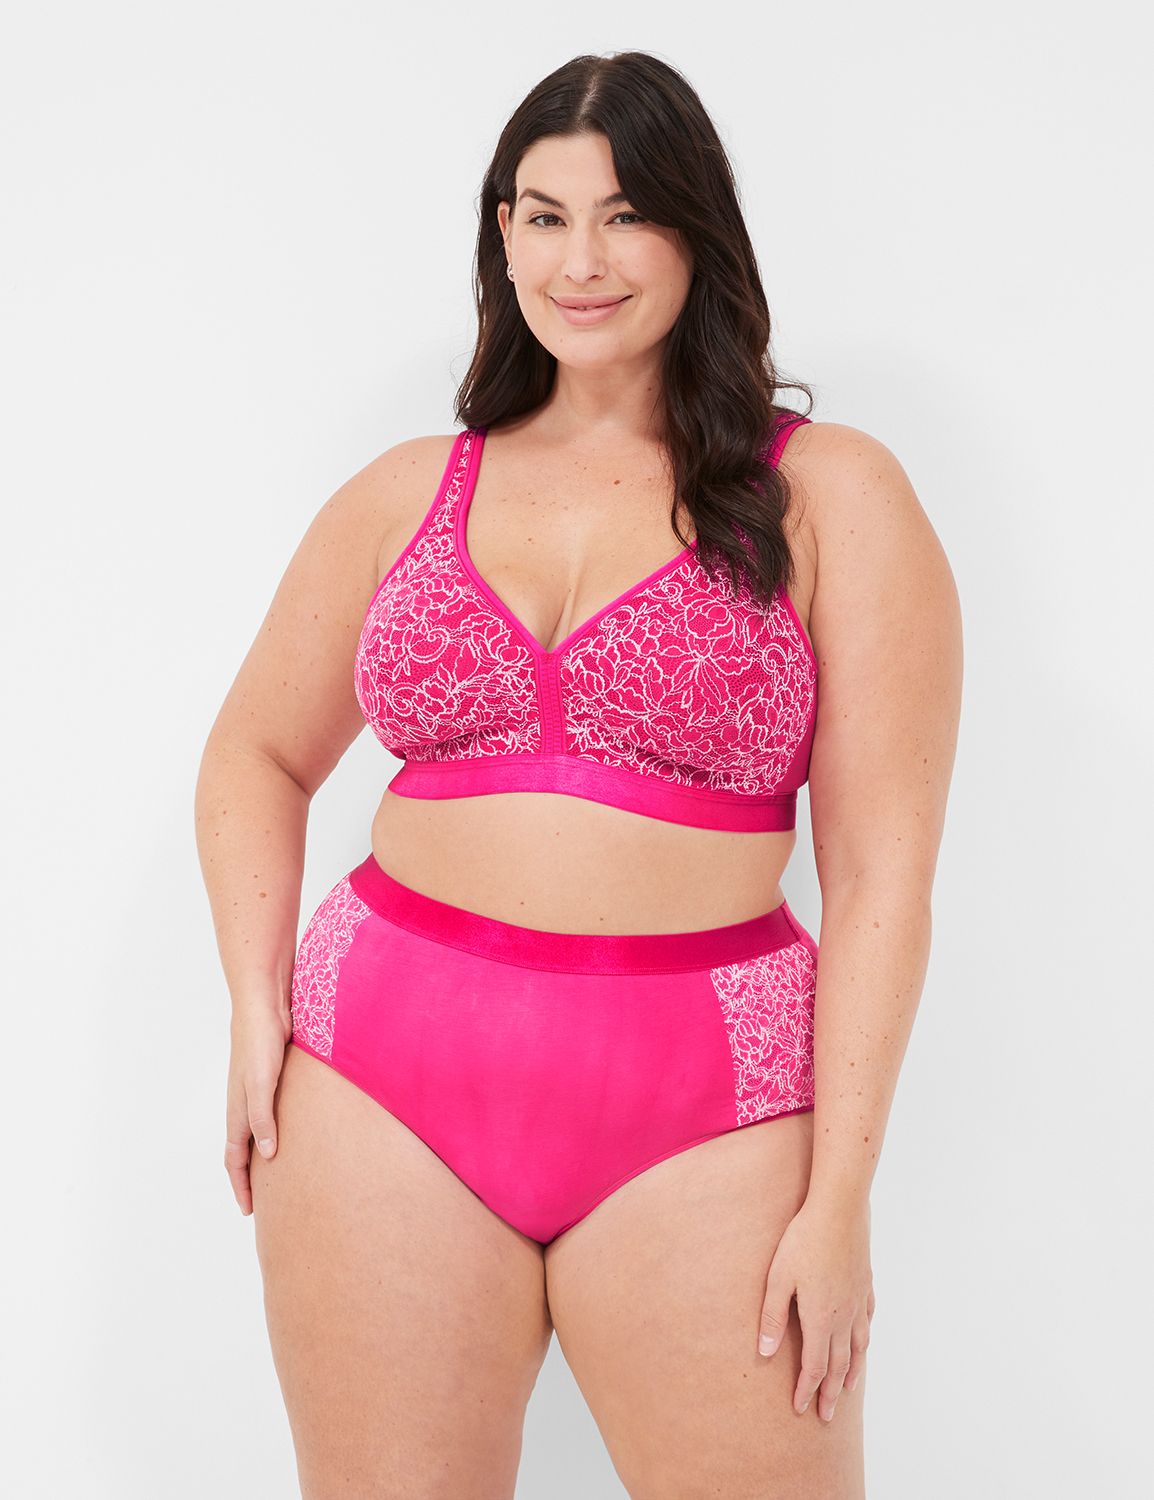 NWT LANE BRYANT CACIQUE PLUS 18/20 LACE THONG PANTY BRIGHT PINK CORAL -  Klinmart